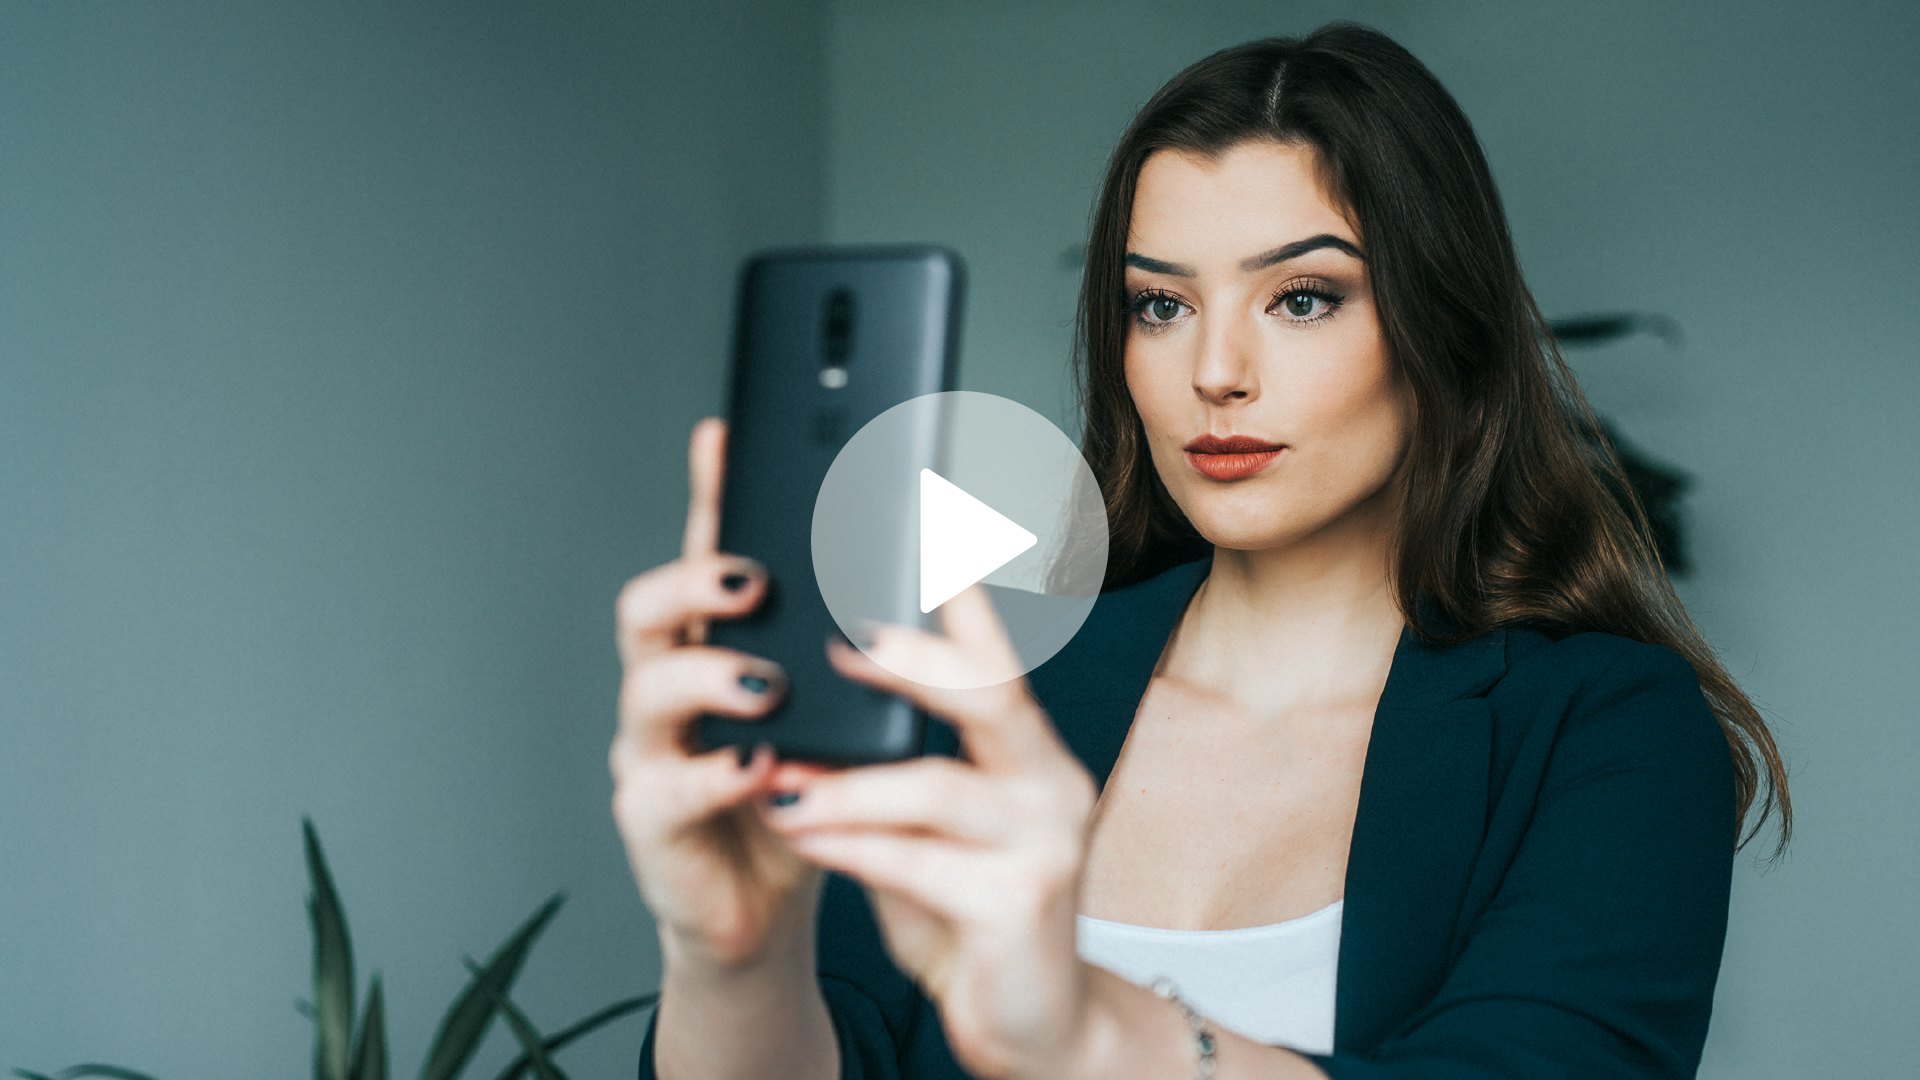 A young woman with dark hair taking a selfie